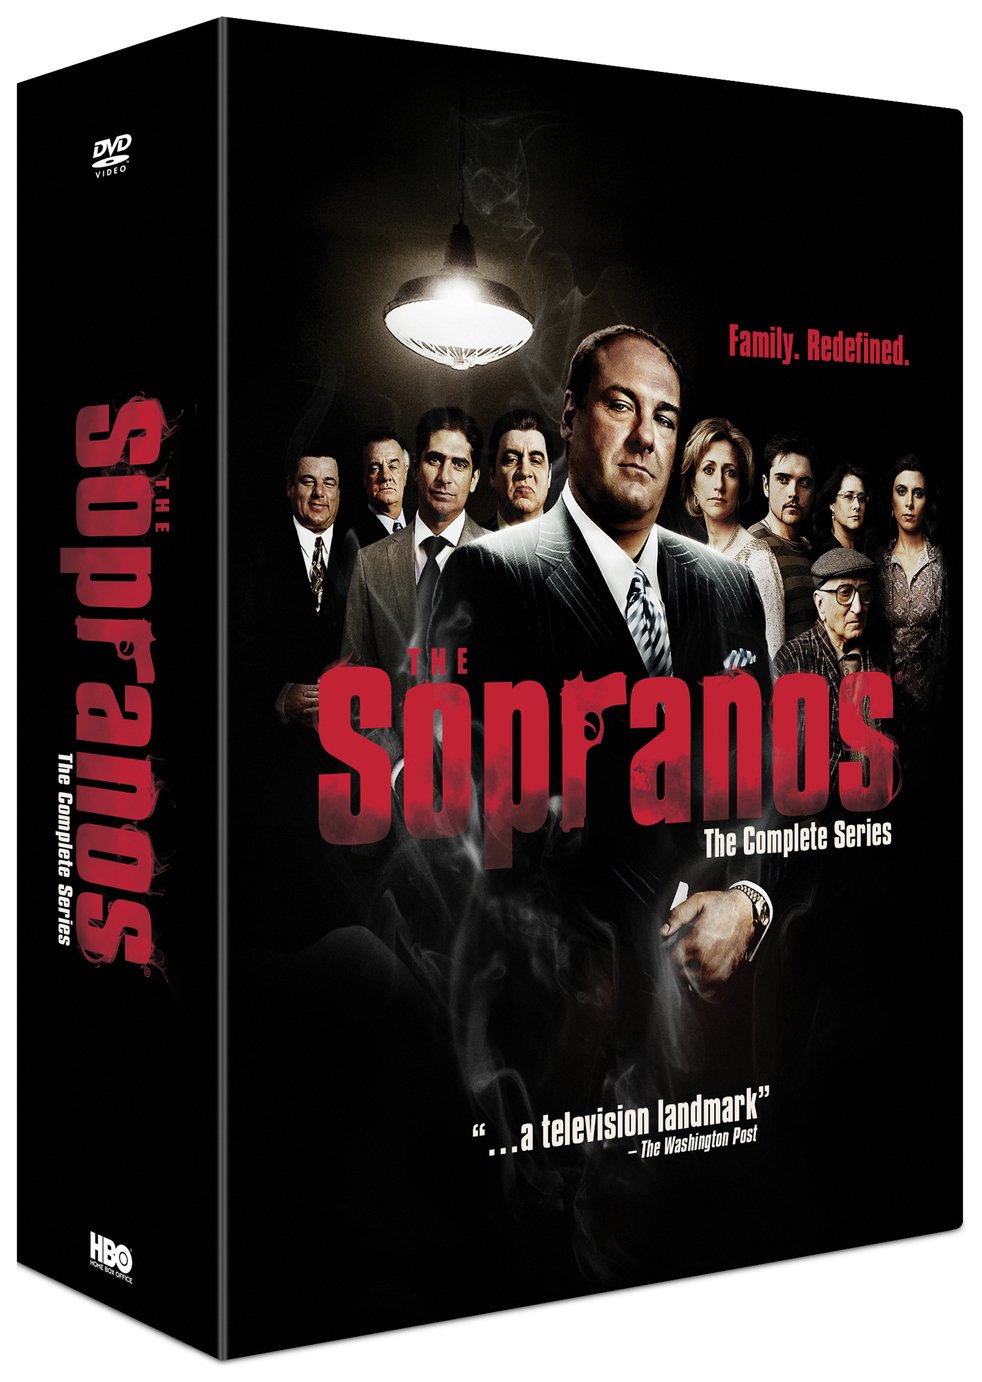 The Sopranos Complete Collection DVD Box Set